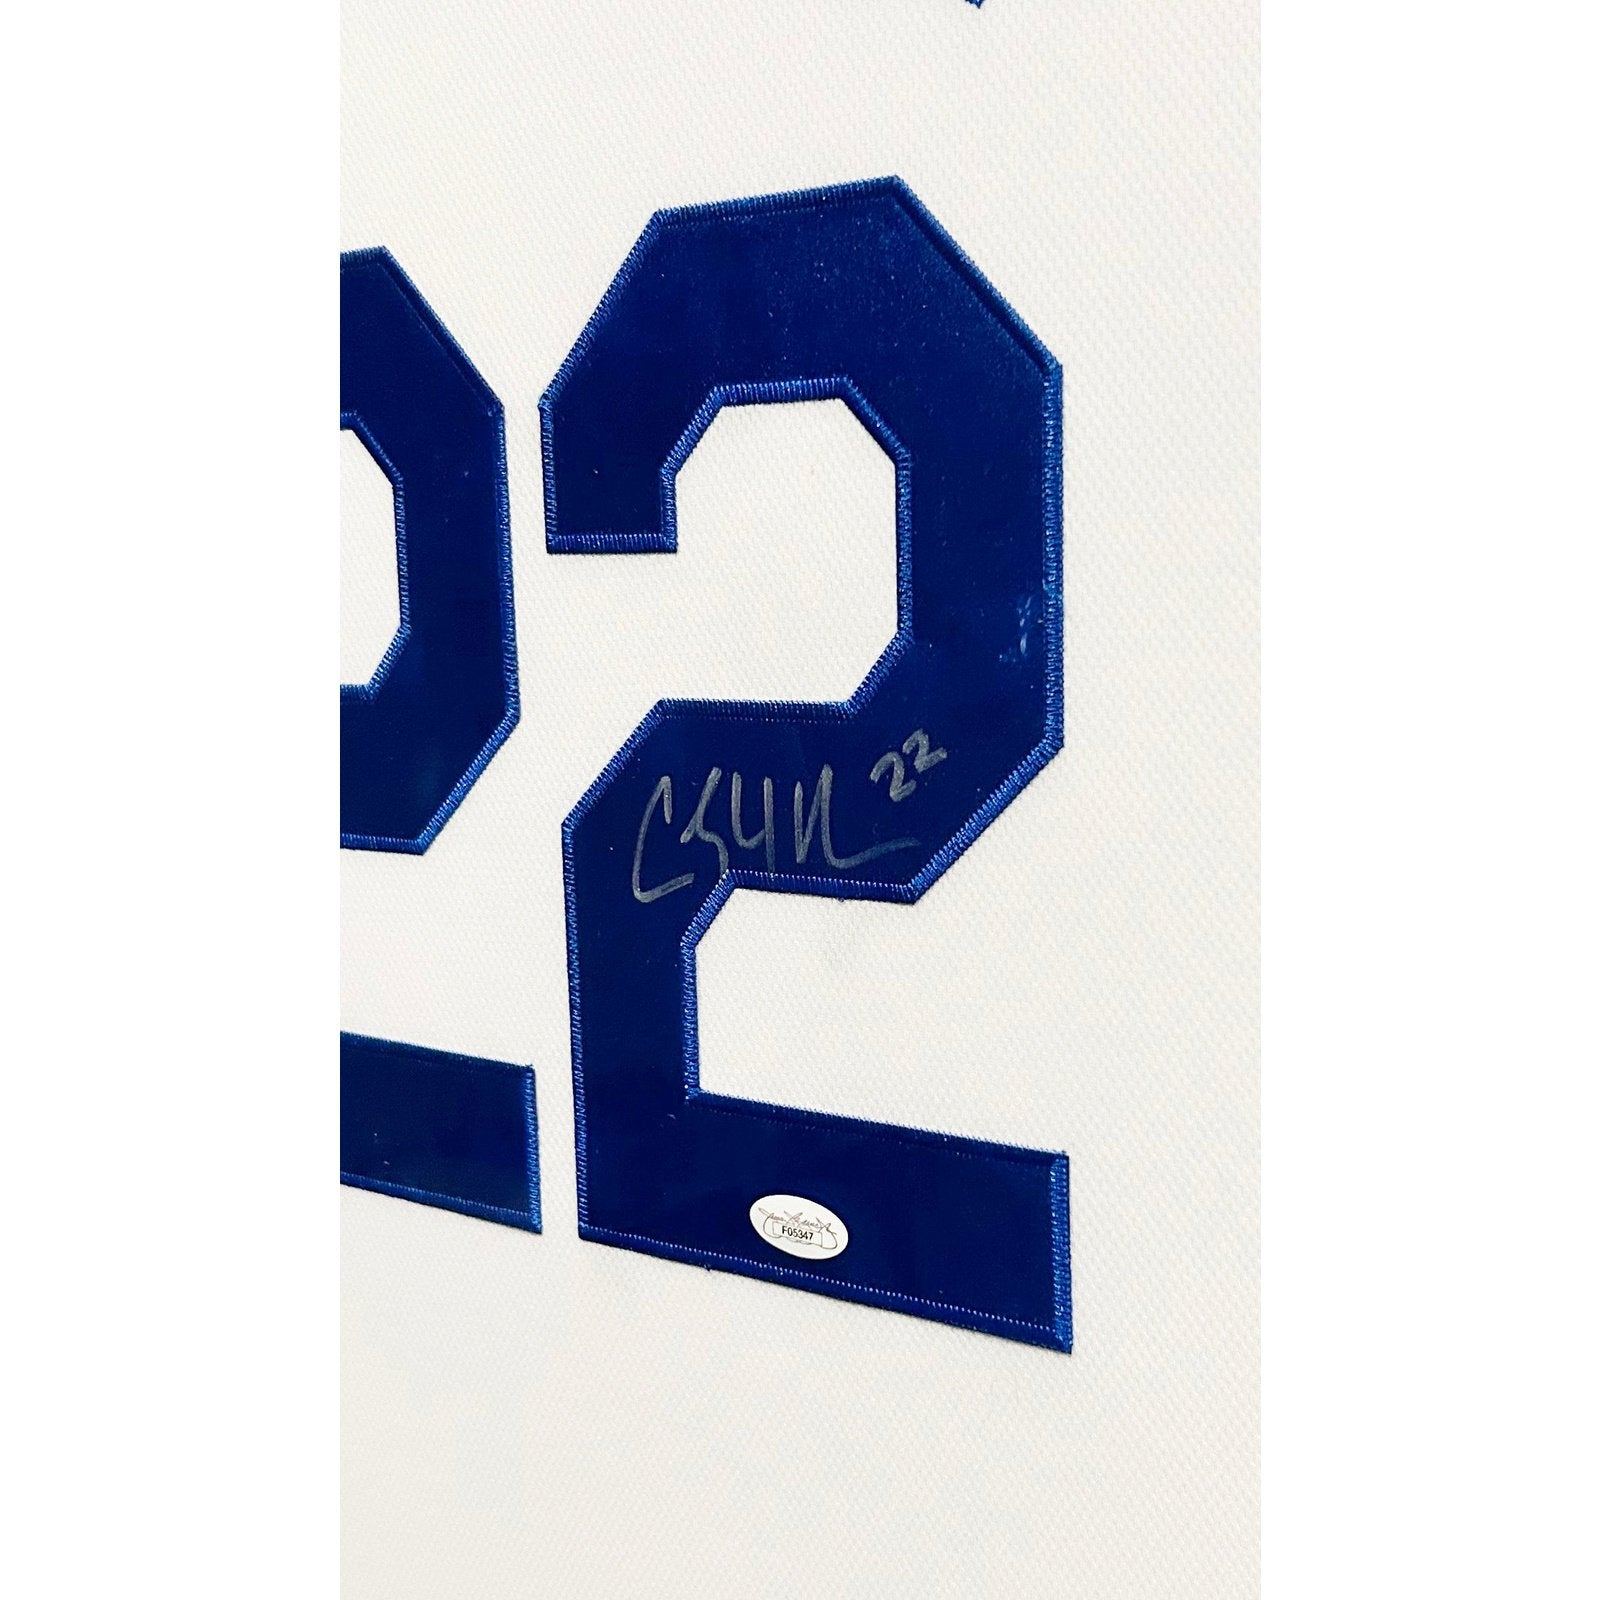 Vintage Autographed Signed Clayton Kershaw Jersey 